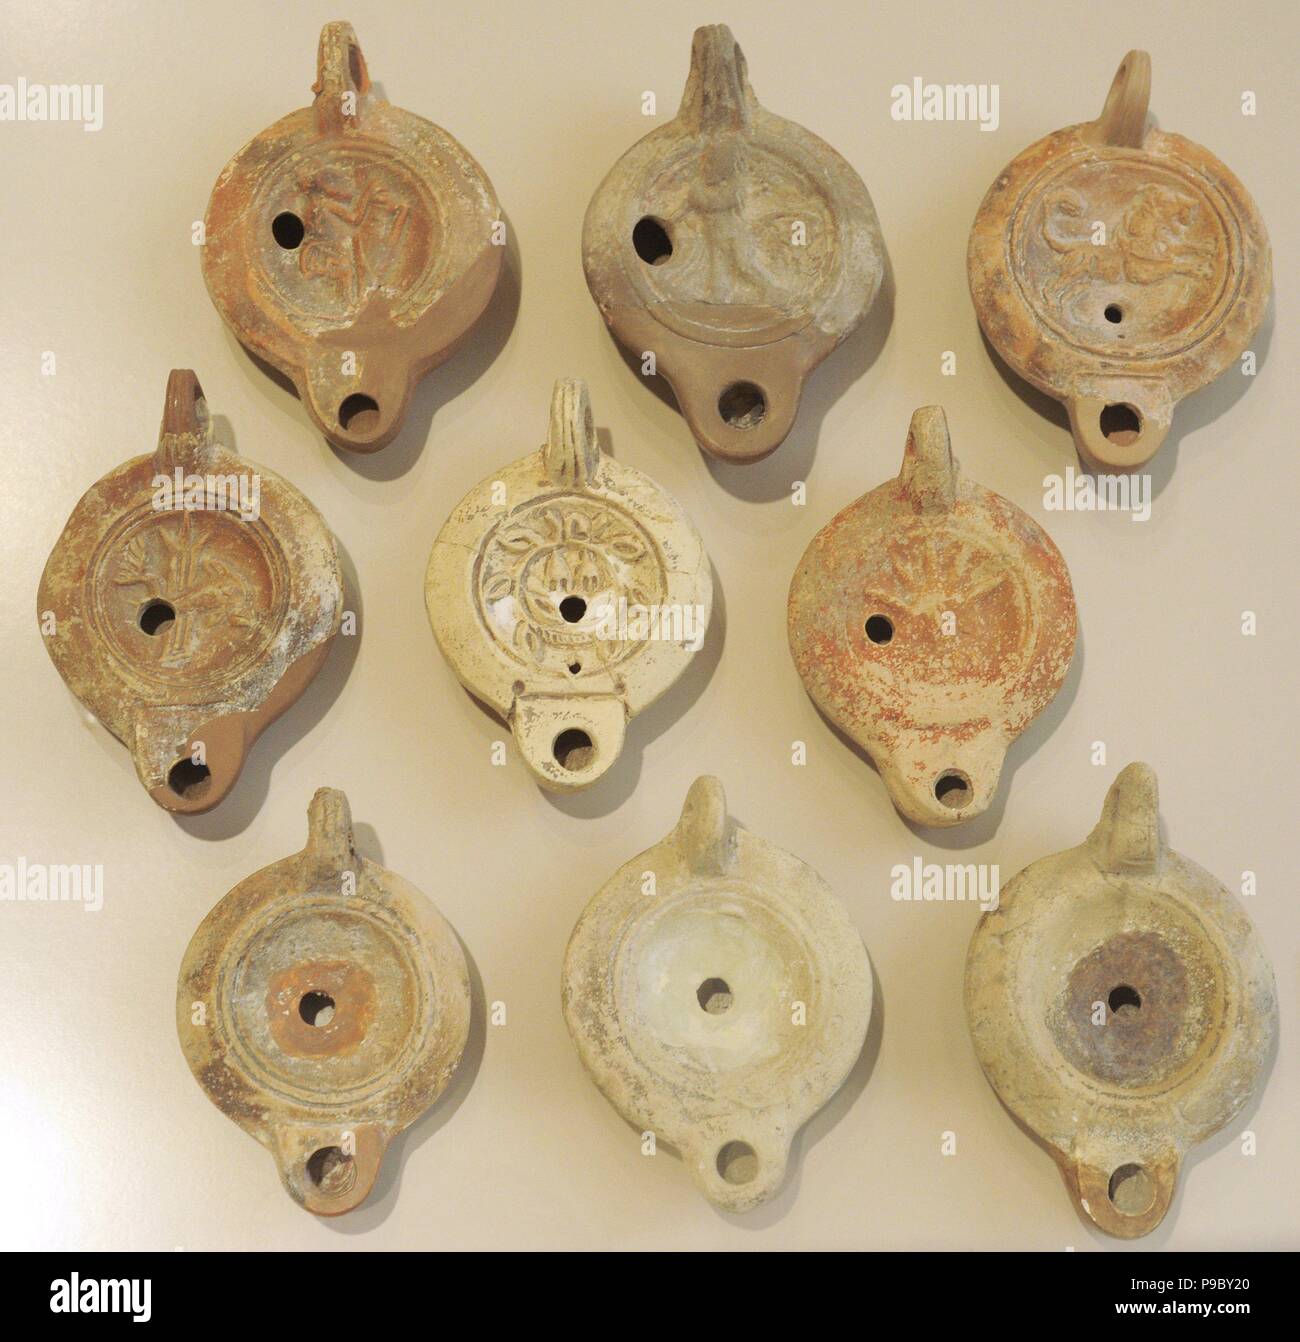 Oil lamps. Clay. Some central discus ornamented with motif in low relief. 2nd century. Spain. National Archaeological Museum. Tarragona. Spain. Stock Photo